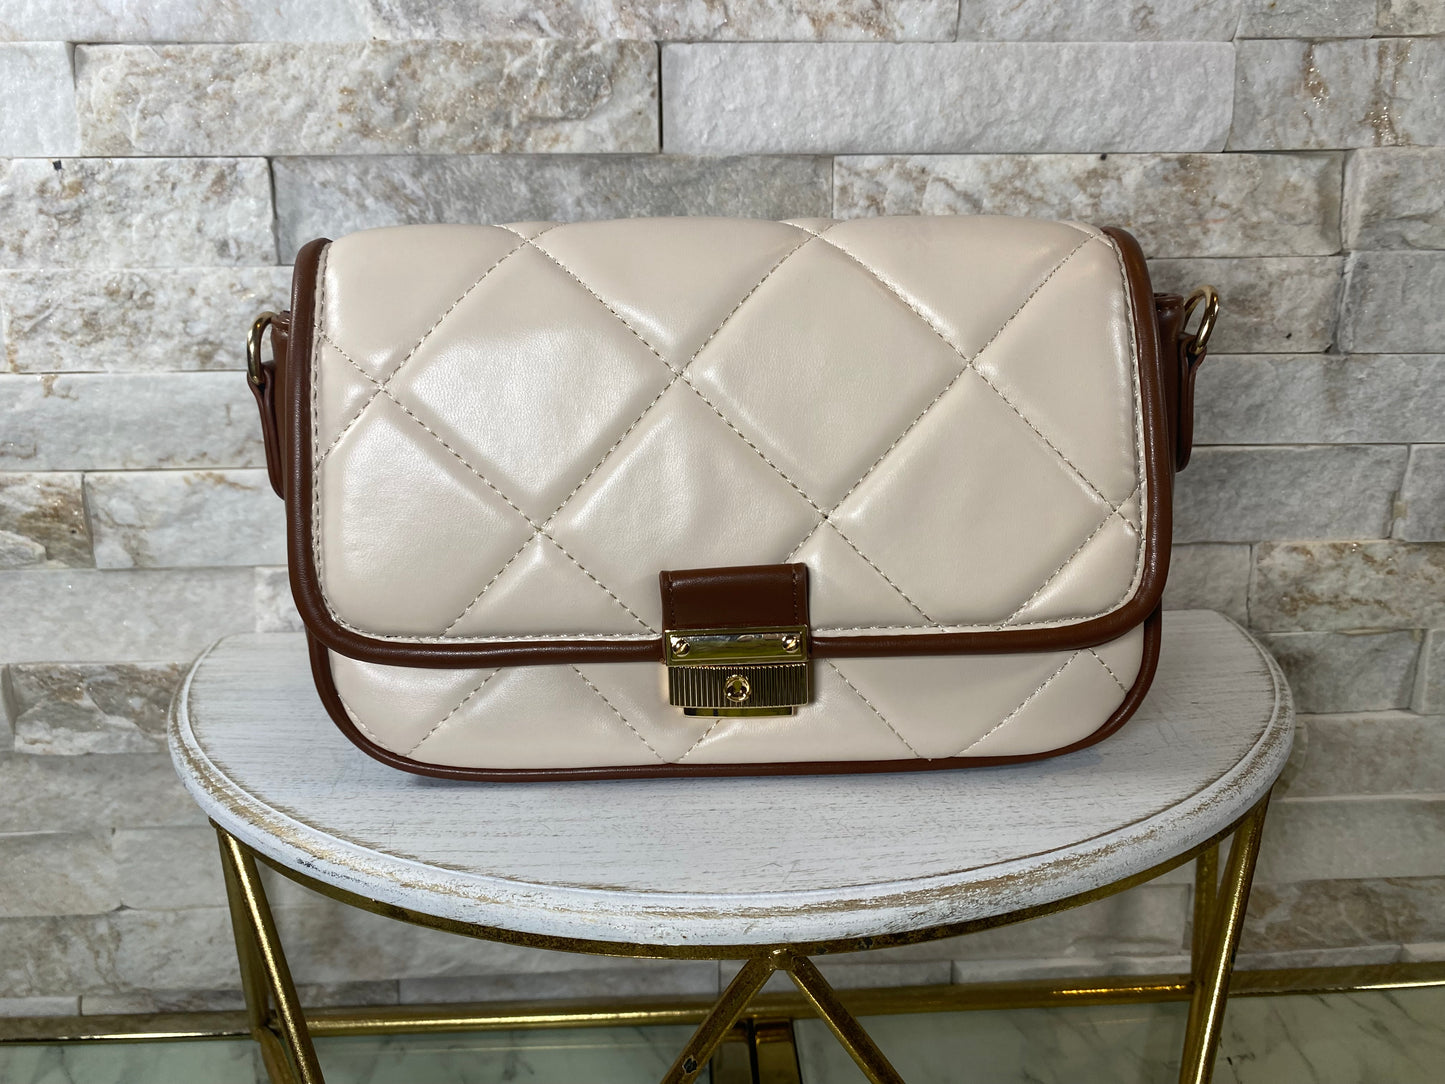 Quilted Cream and Brown Shoulder Bag